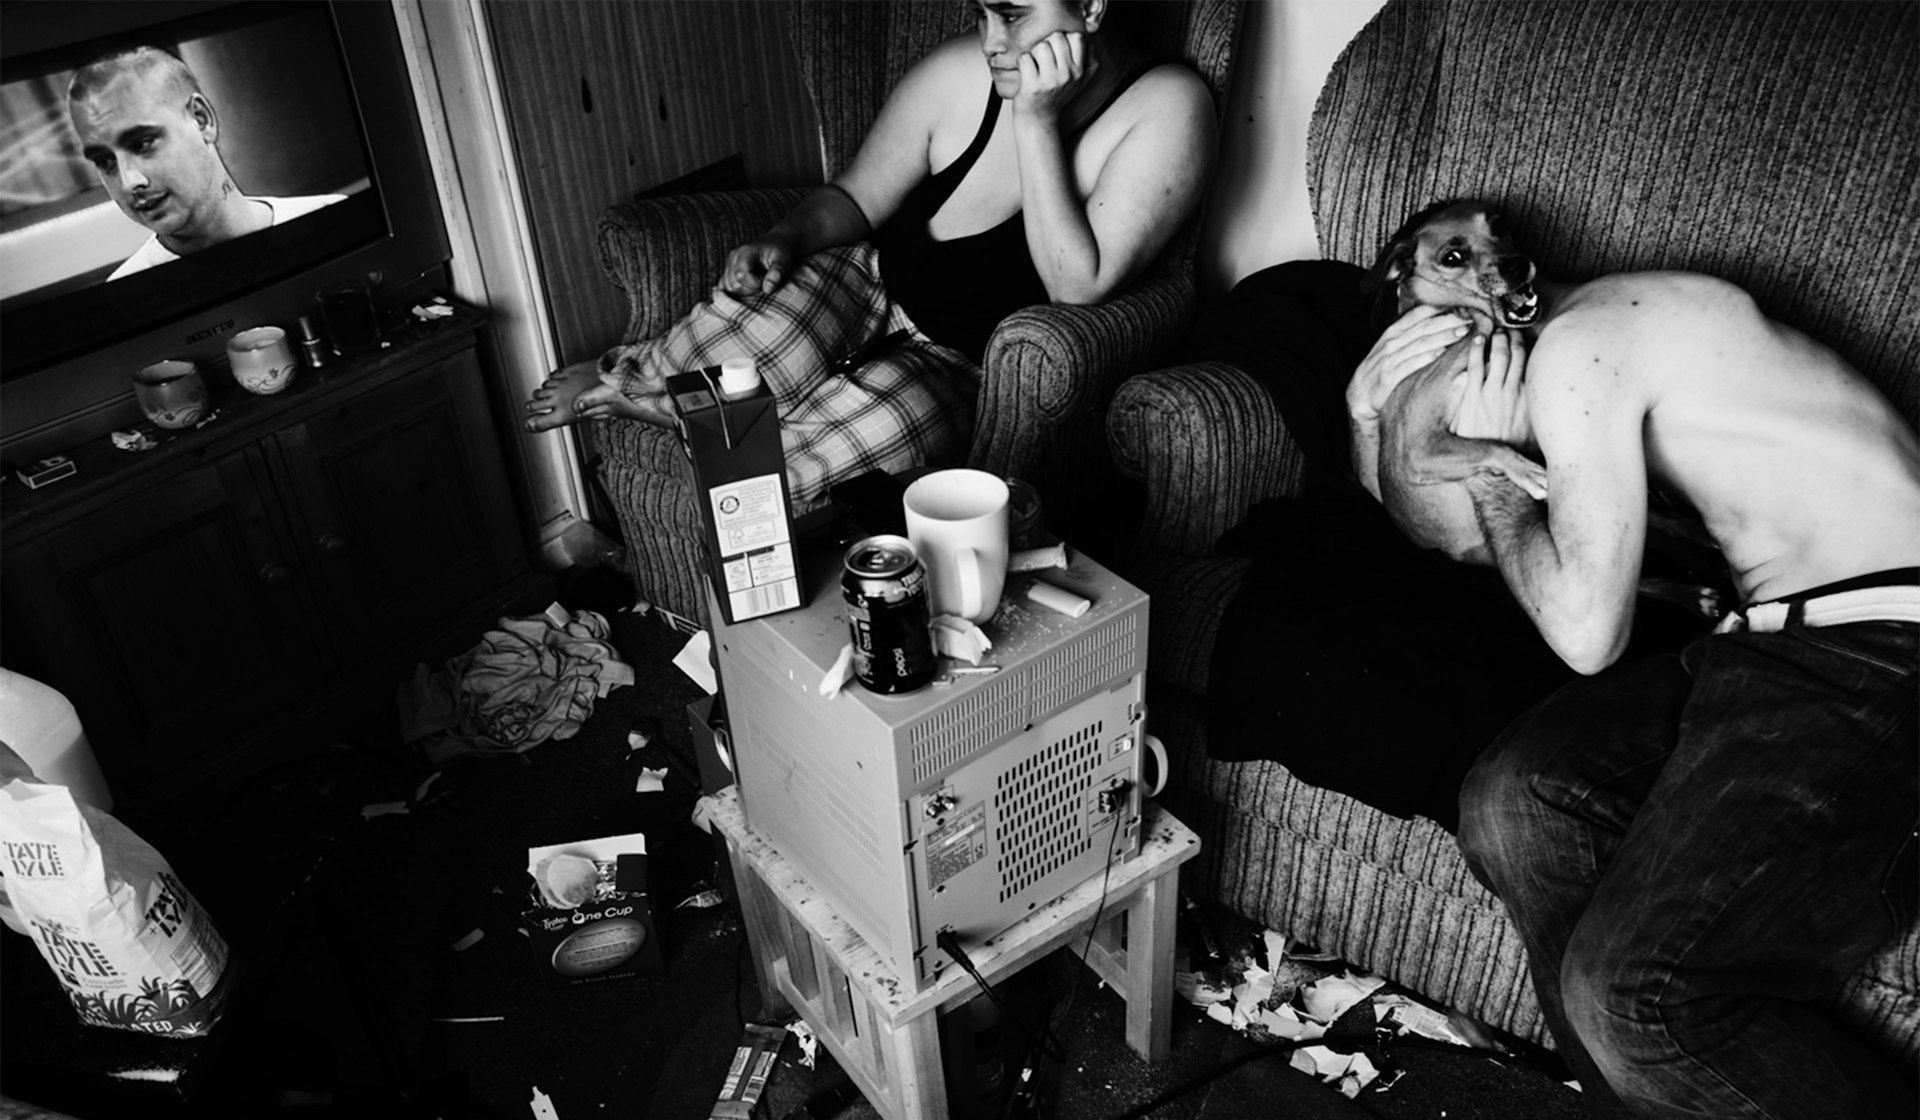 What it's like to live on the fringes of British society